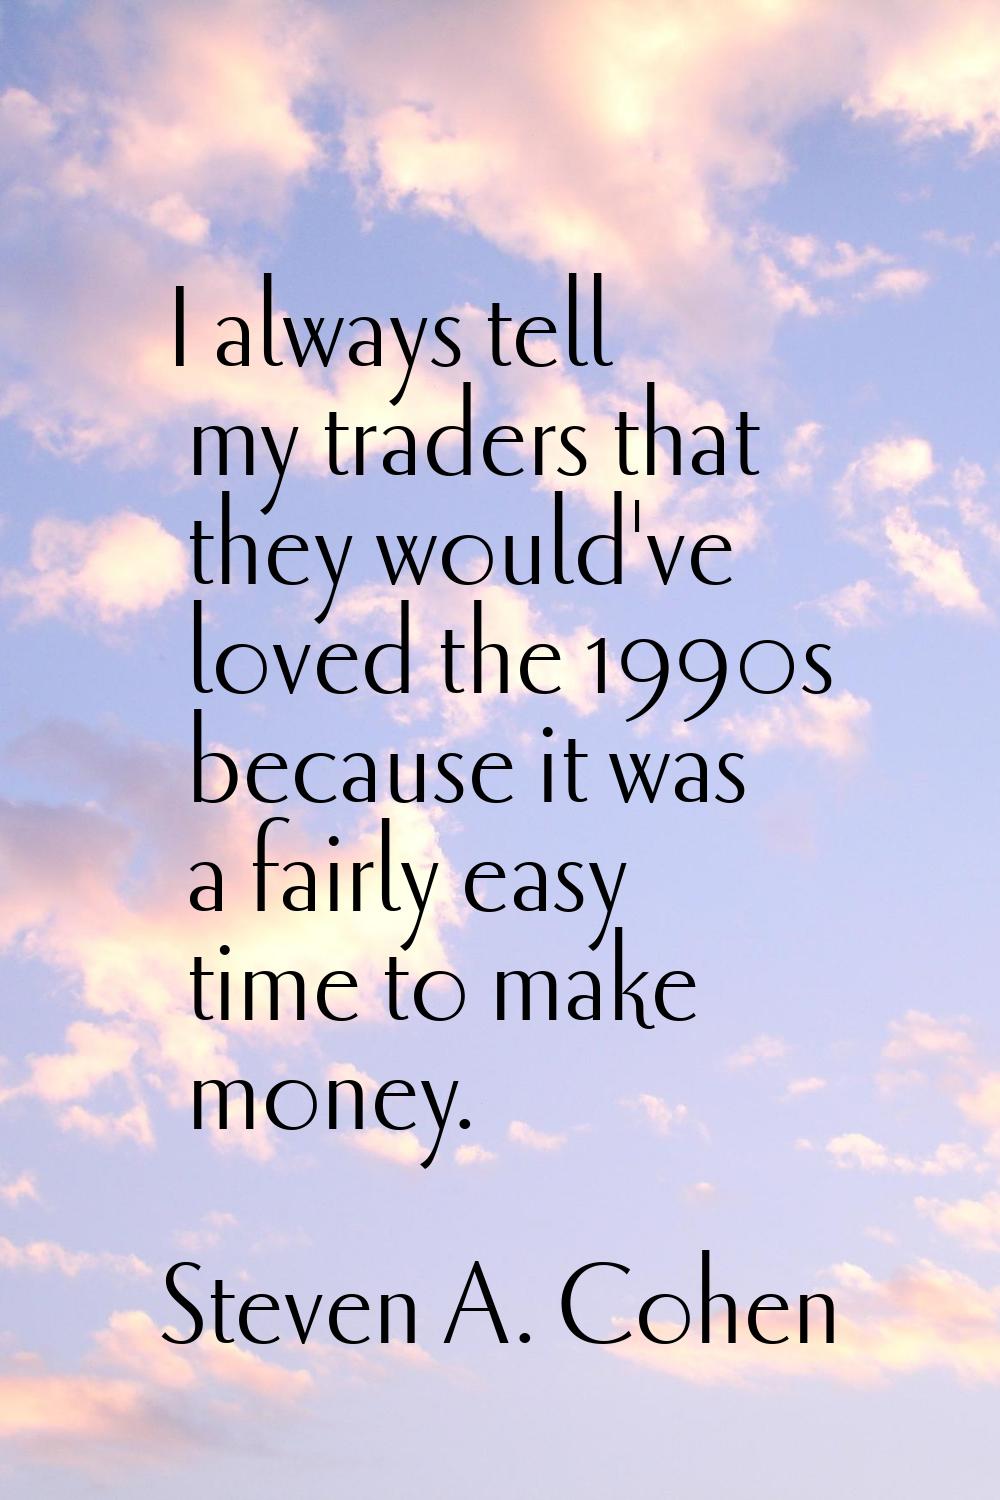 I always tell my traders that they would've loved the 1990s because it was a fairly easy time to ma